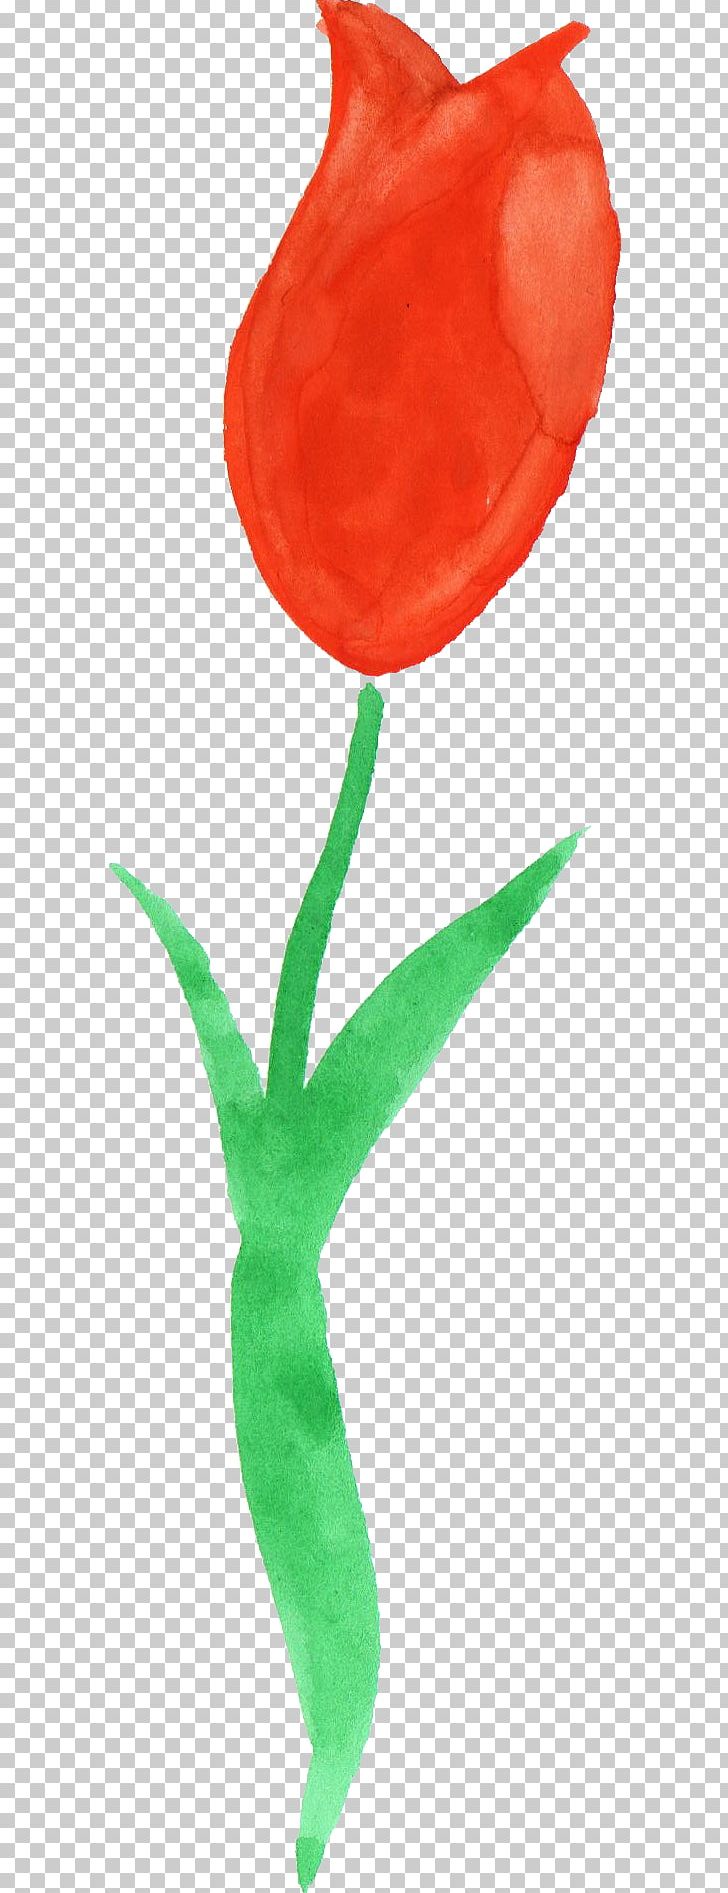 Tulip Watercolor Painting PNG, Clipart, Download, Flora, Flower, Flowering Plant, Flowers Free PNG Download